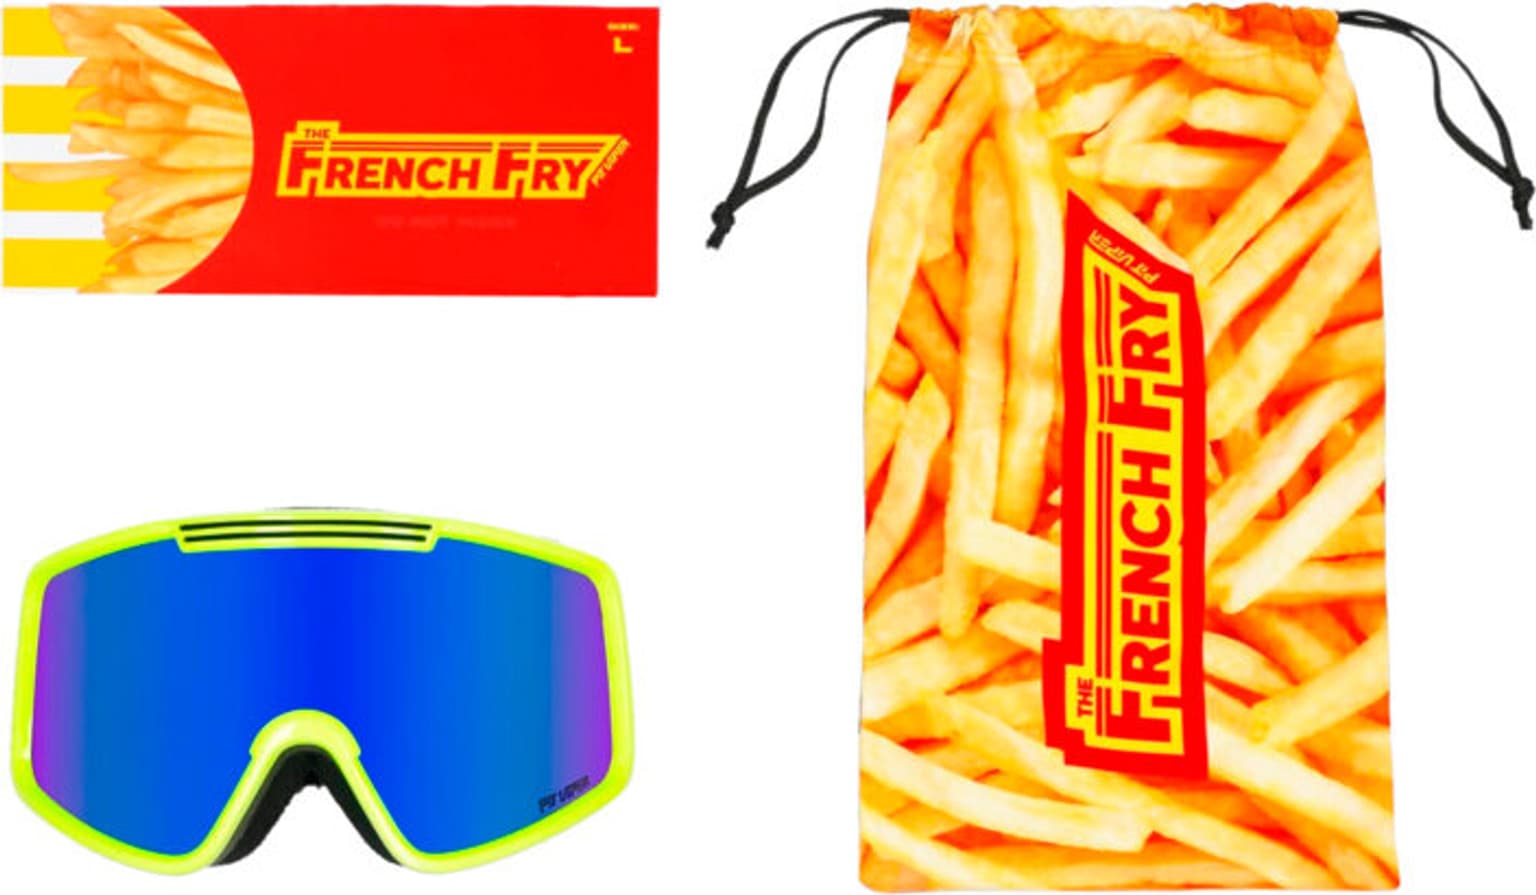 Pit Viper Pit Viper The French Fry Goggle Large The Sludge Skibrille 3